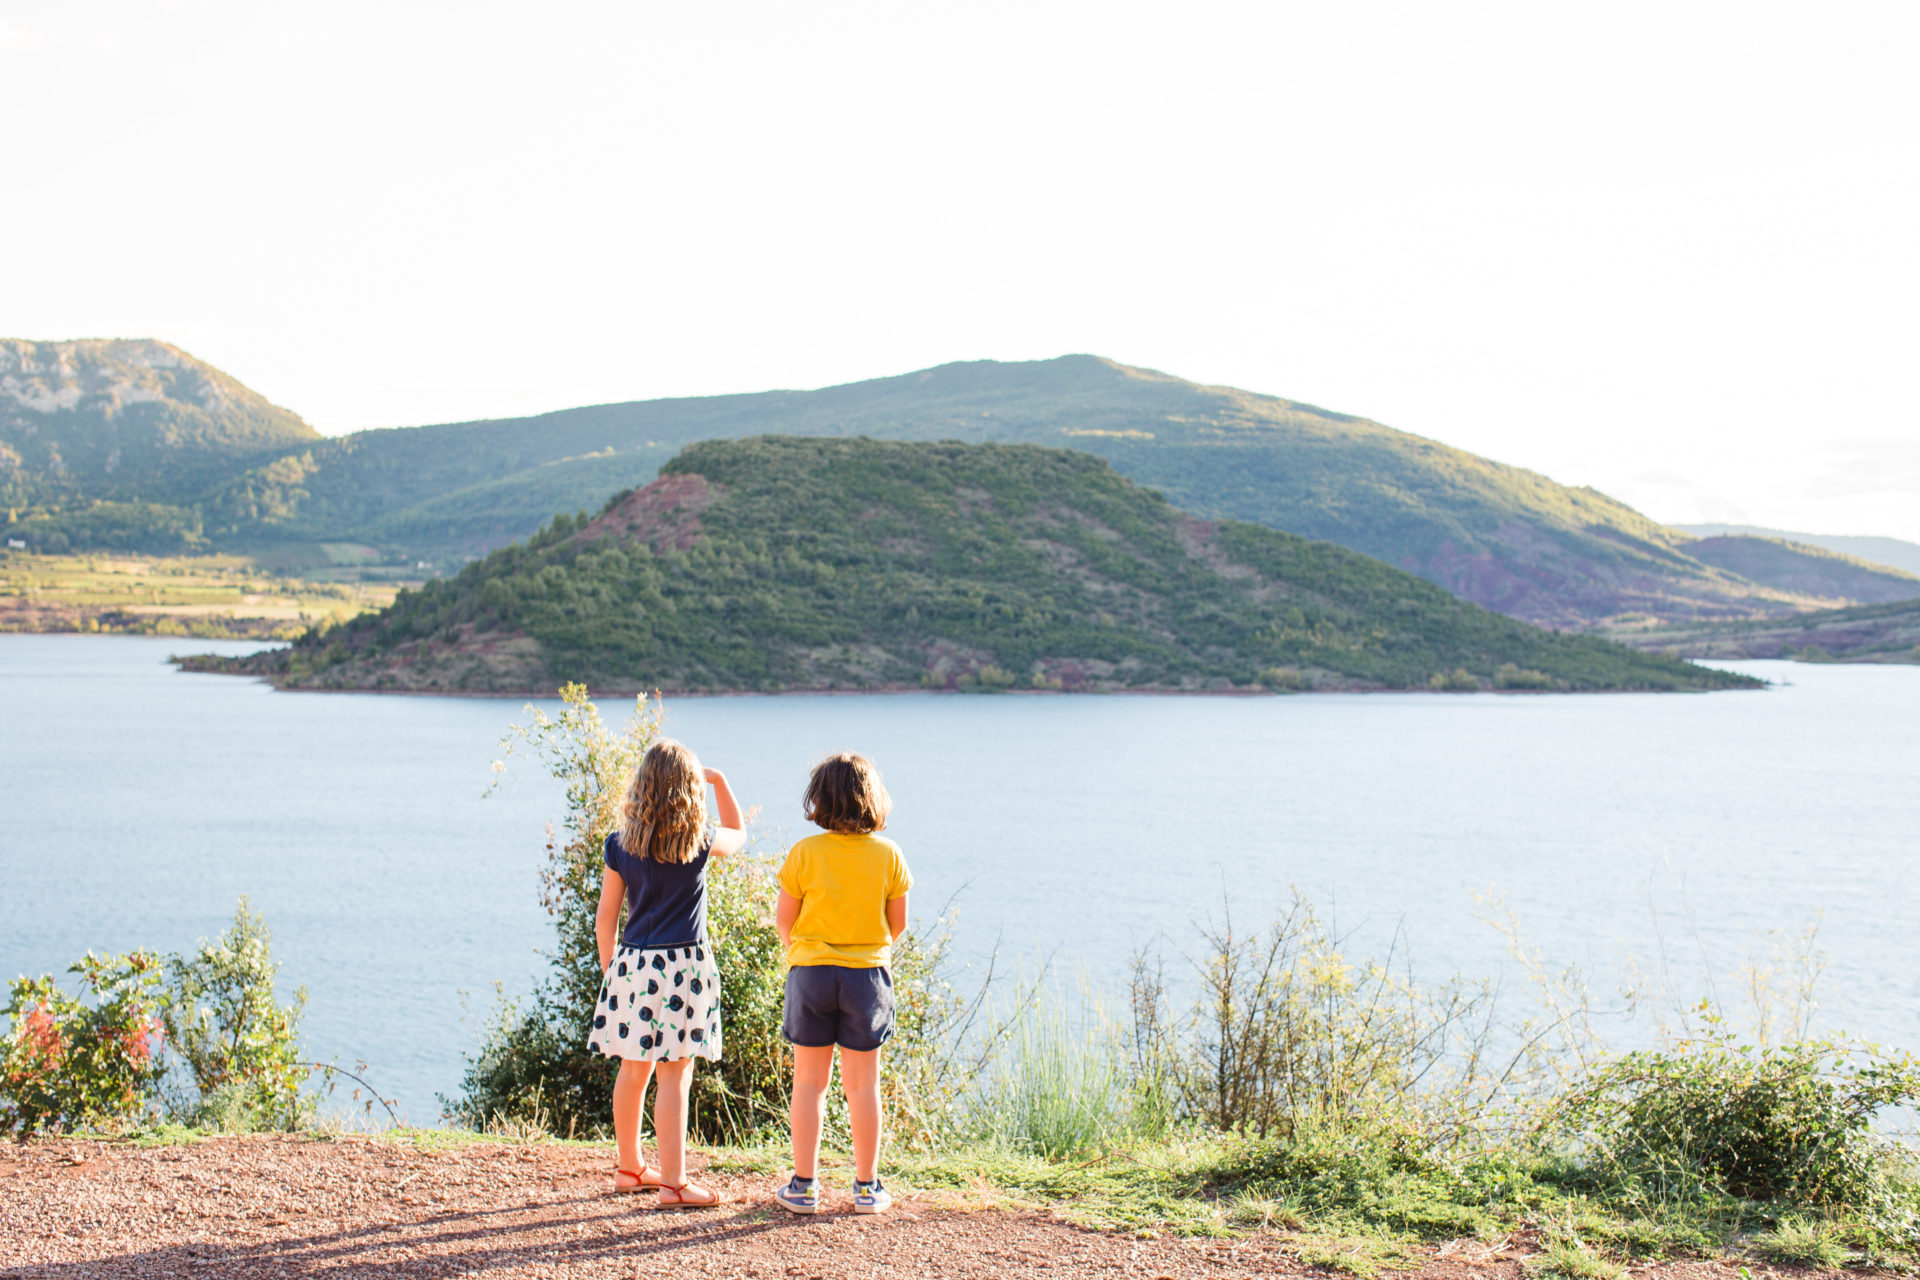 Parents deserve a family-friendly holiday resort with childcare included. We discuss what childcare is available, and how to have the best family holiday